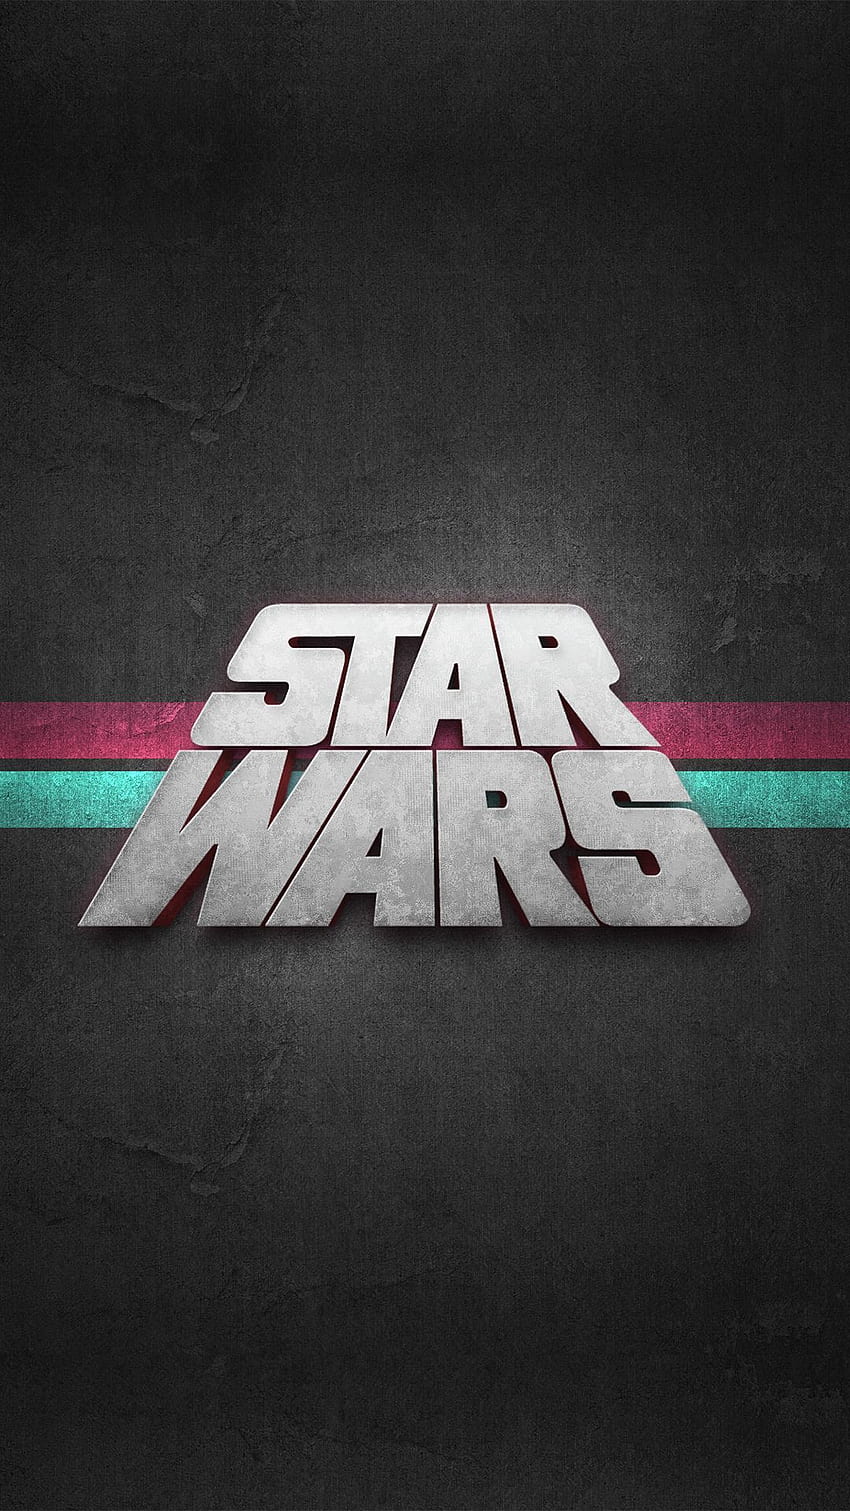 Star Wars Android, Star Wars Cell HD phone wallpaper